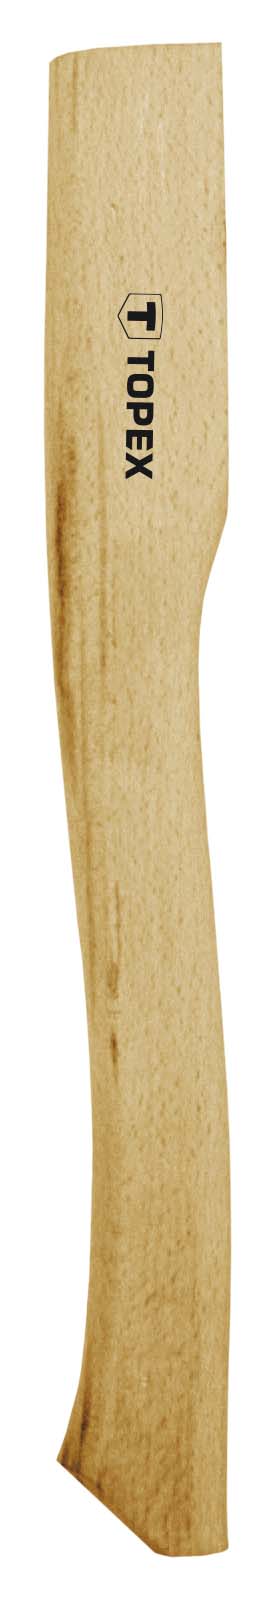 TOPEX AXES WOODEN HANDLE 700mm